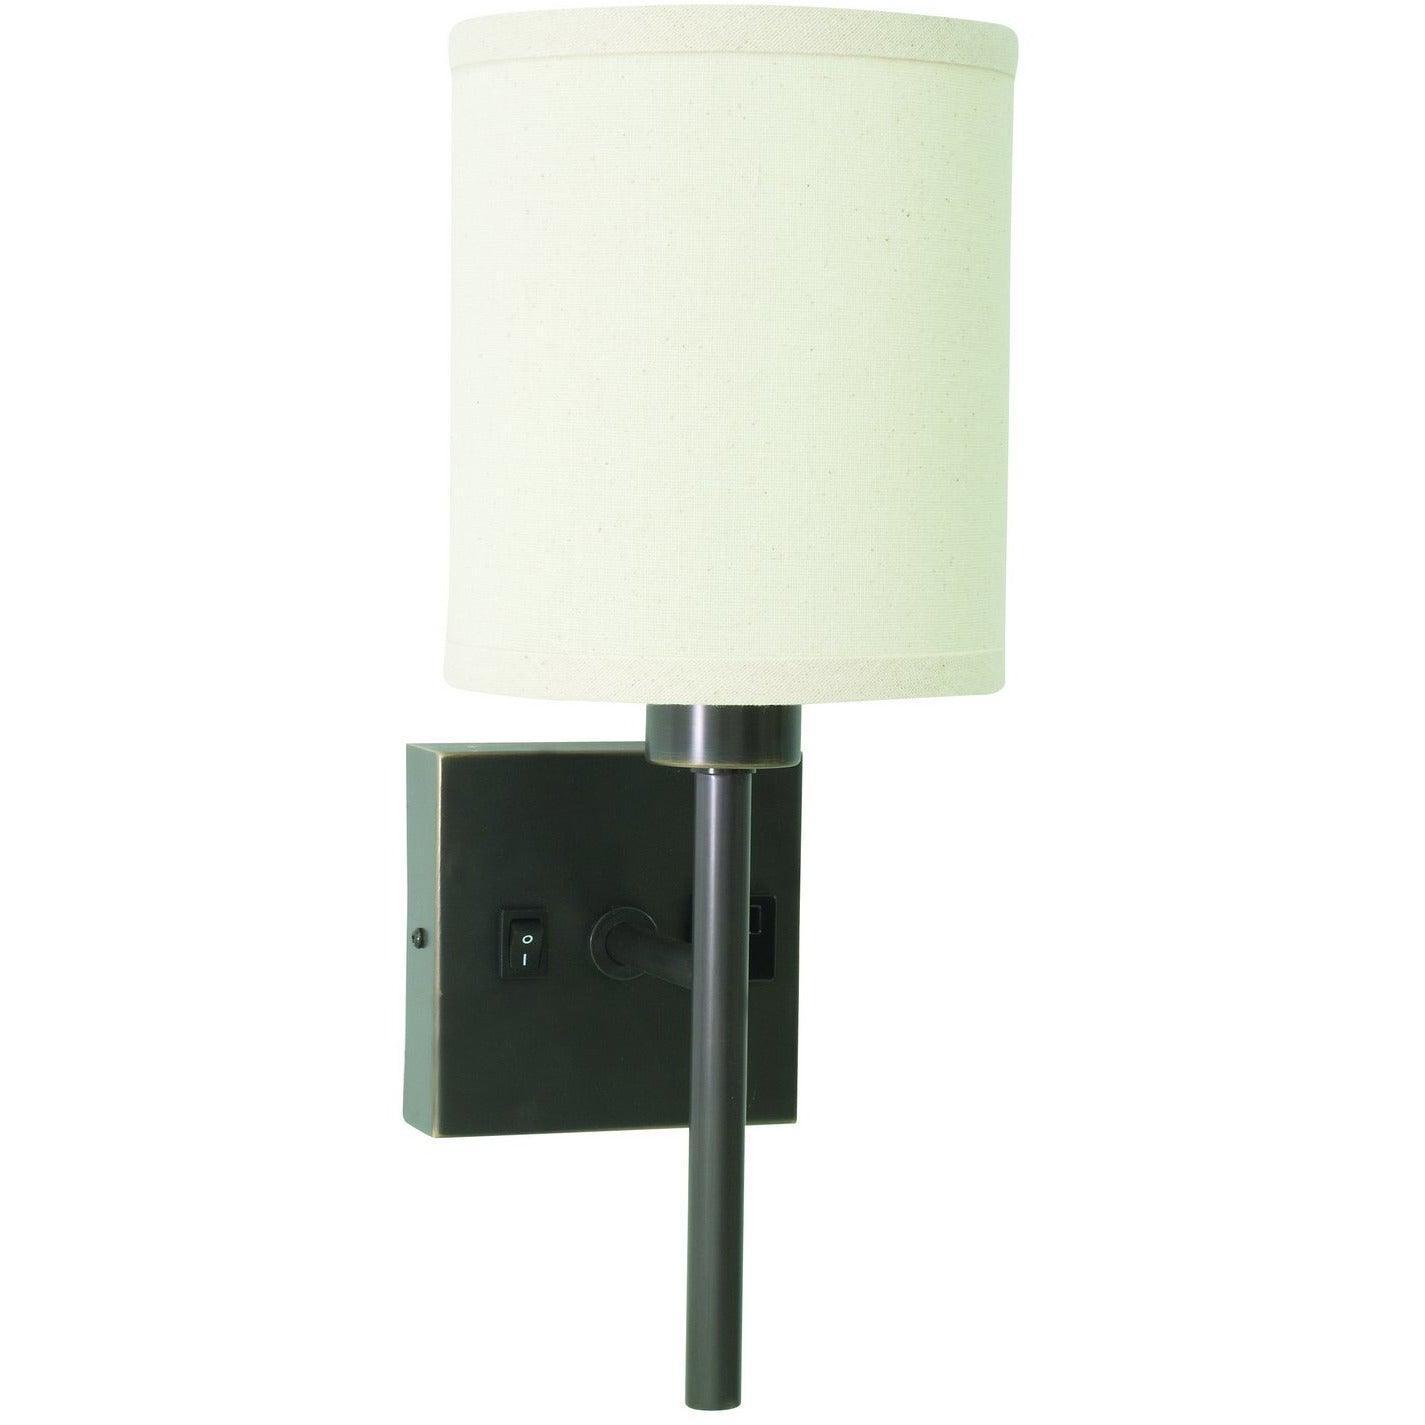 House of Troy - Decorative Wall Lamp 6-Inch One Light Wall Sconce - WL625-OB | Montreal Lighting & Hardware